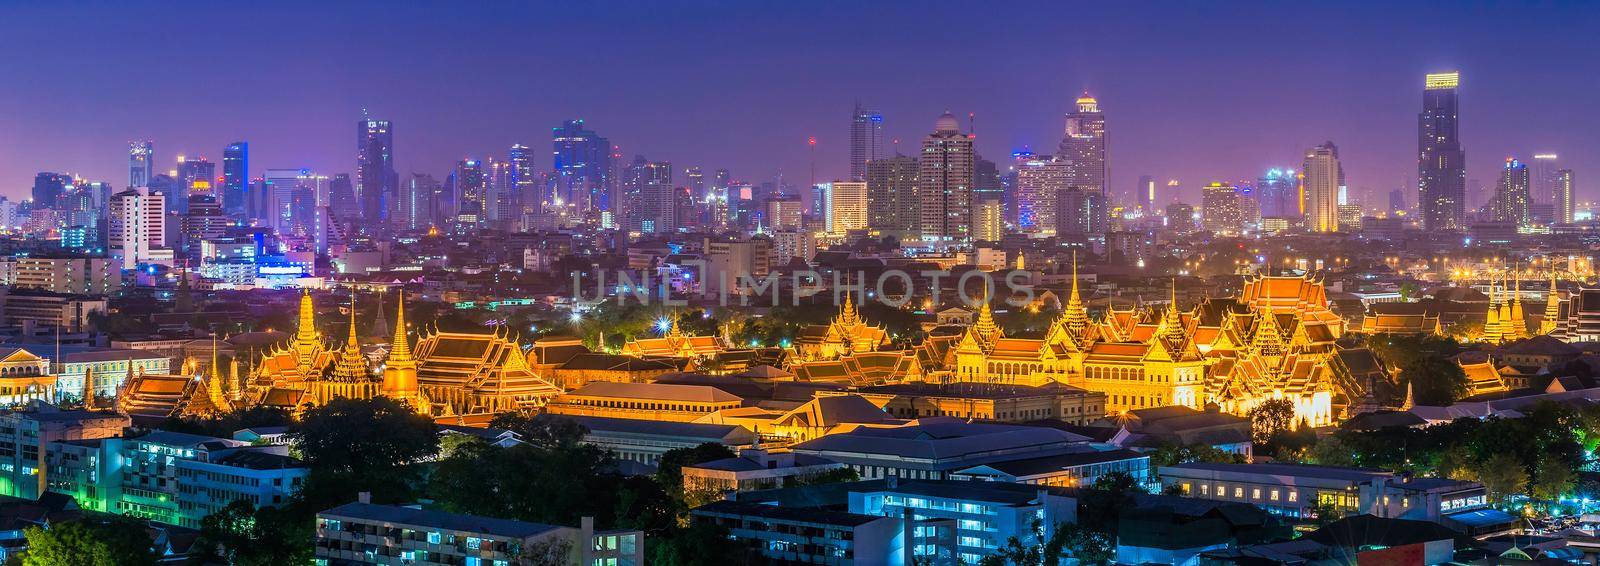 Panorama view of Grand palace and Wat phra keaw or Emerald Buddha temple with Bangkok downtown building in background in Bangkok,Thailand by Nuamfolio